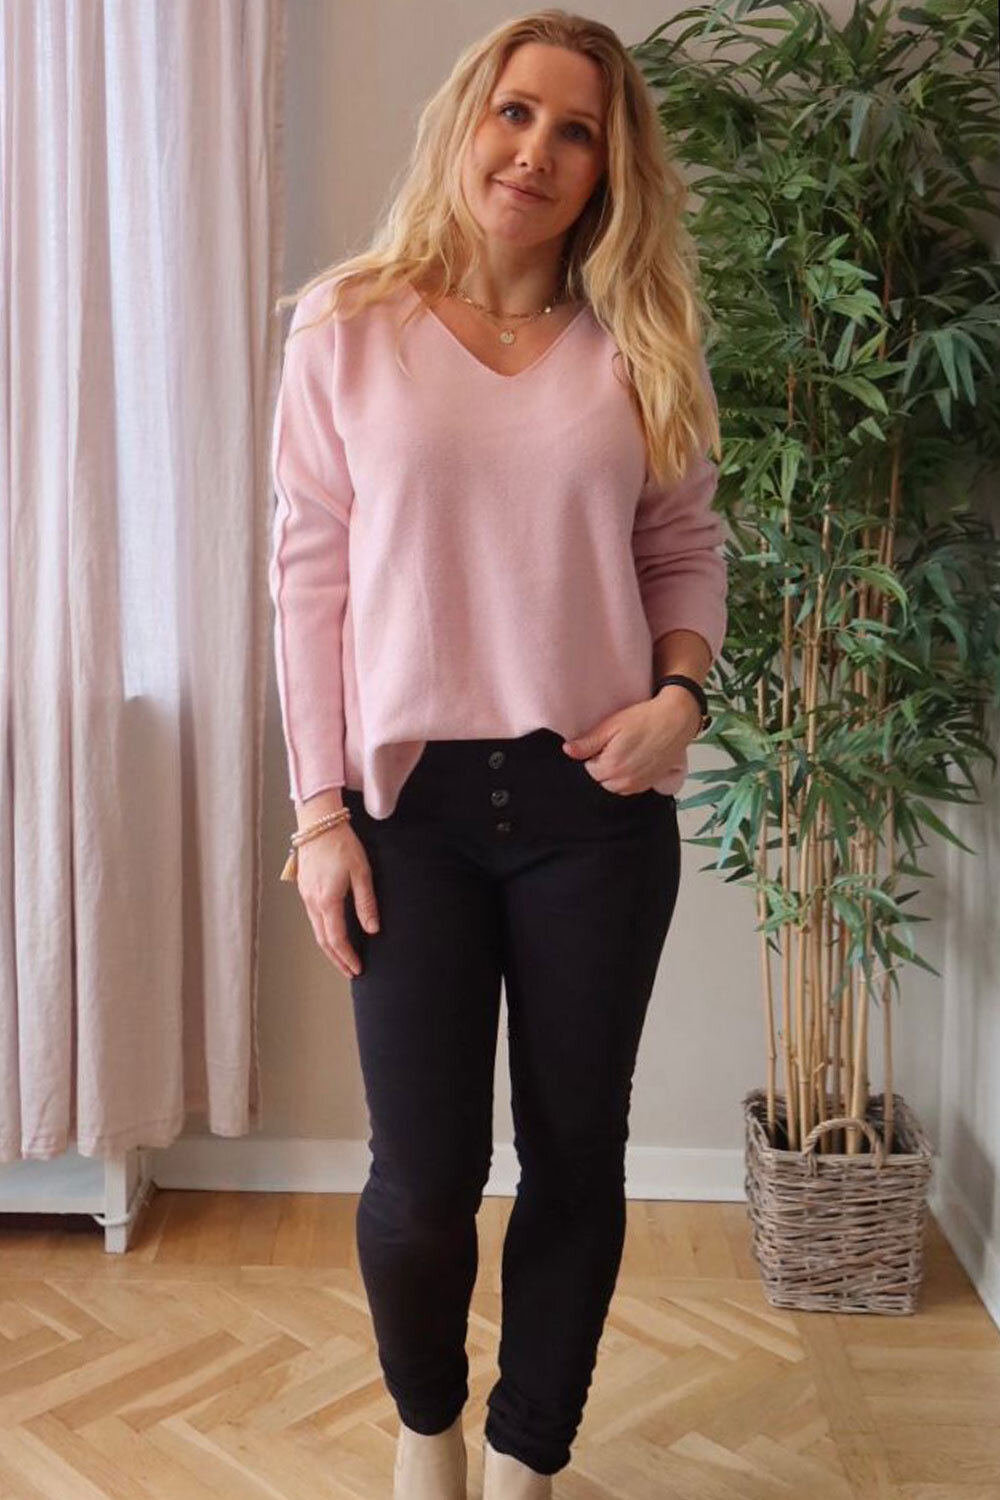 Molly v-neck sweater - Pink